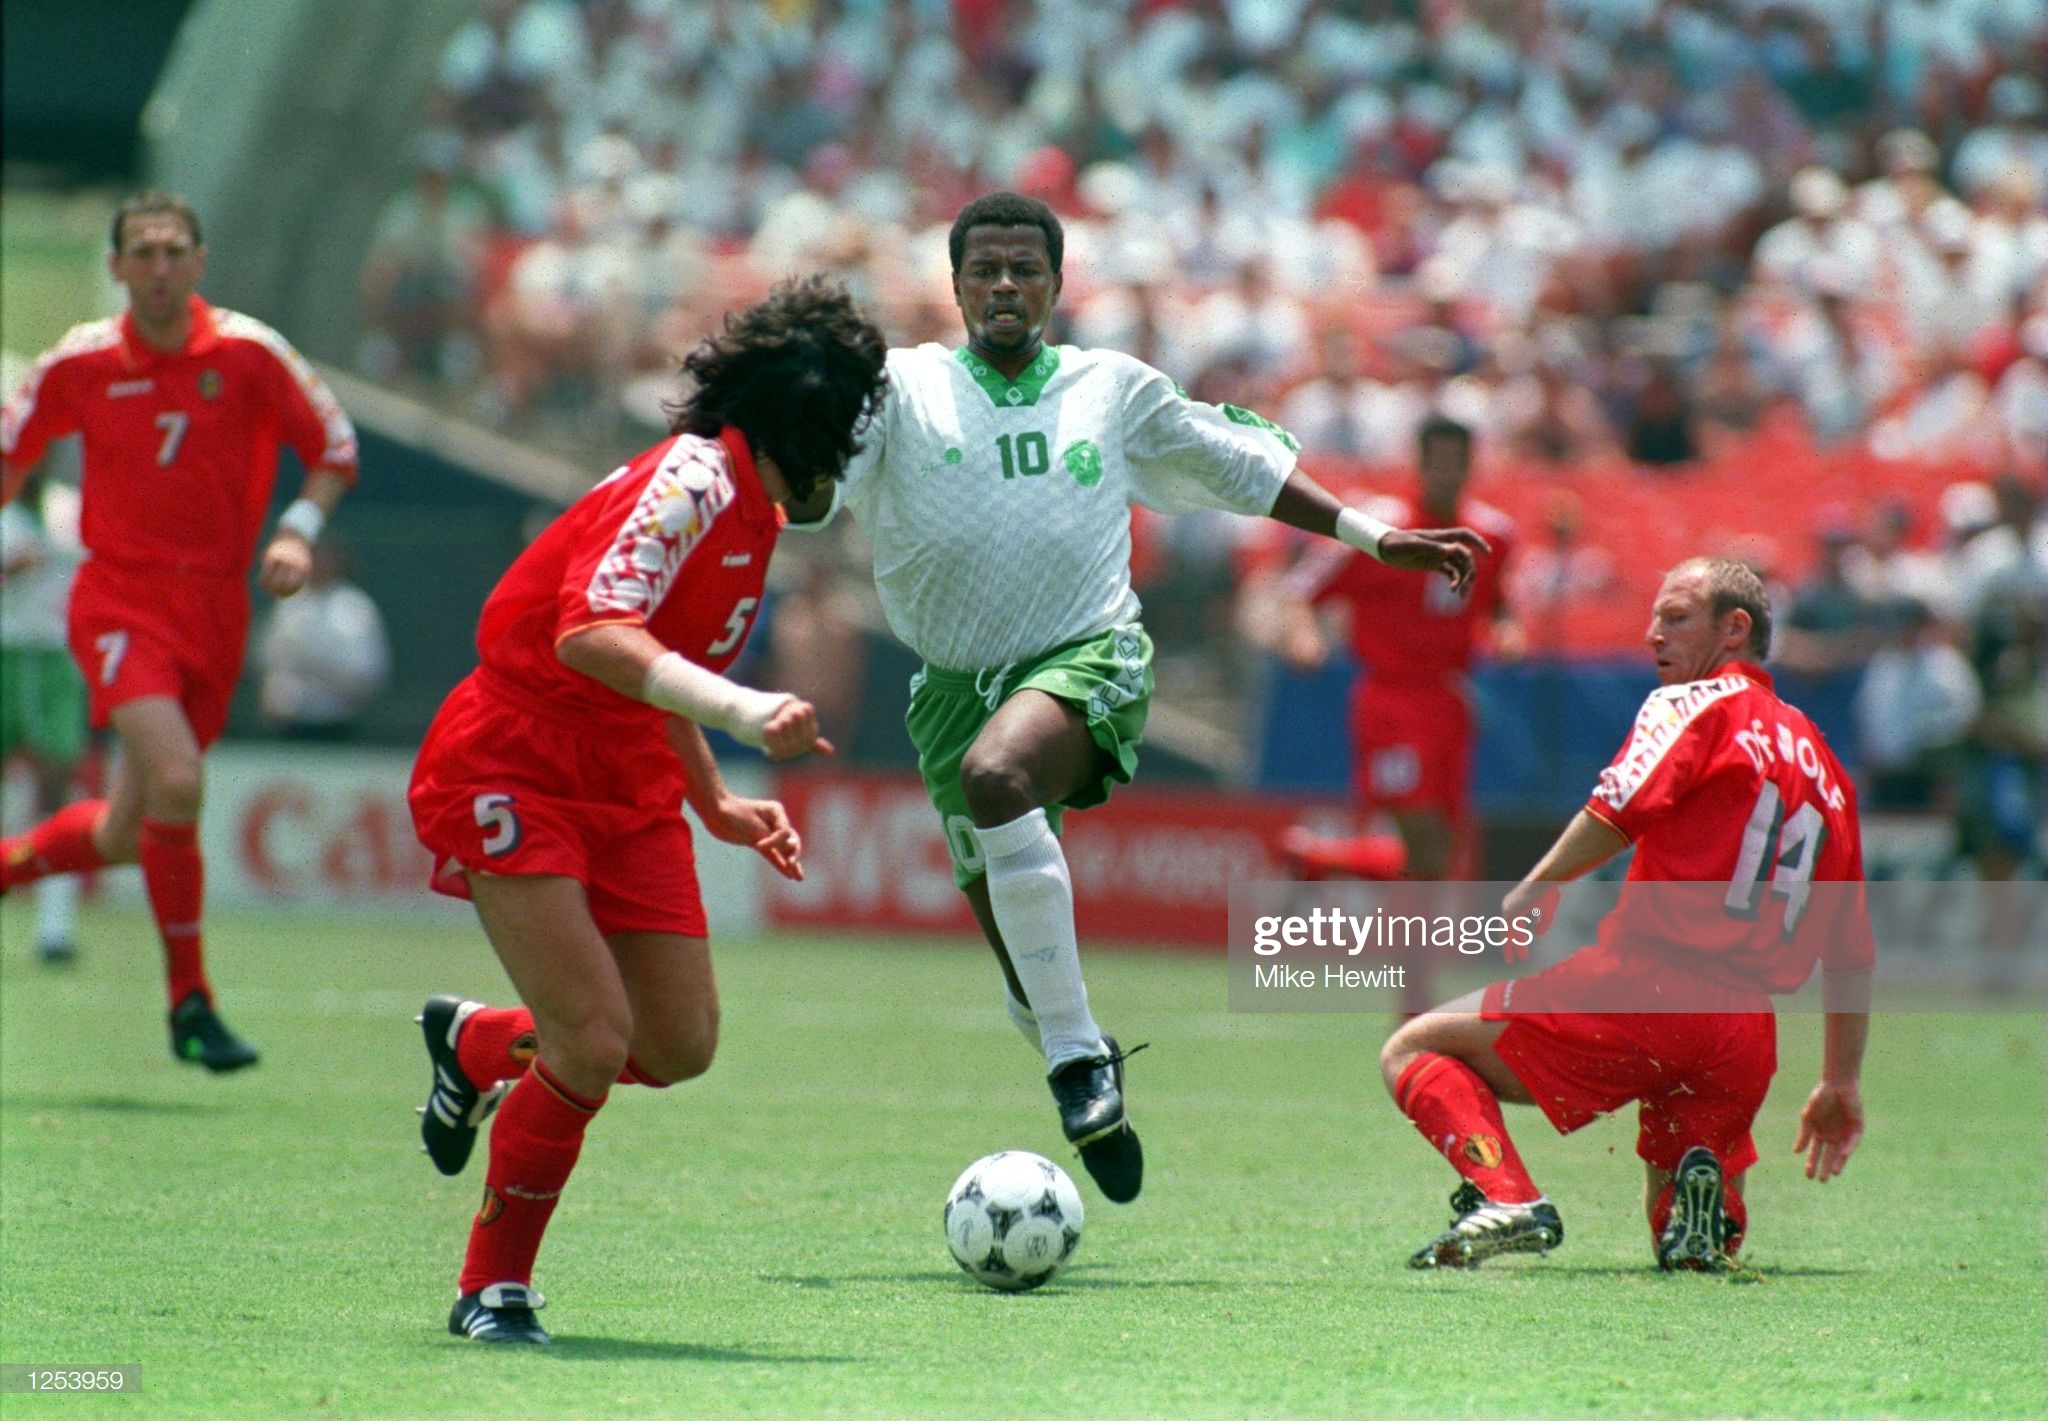 1994: World Cup at RFK Stadium Produced One of Soccer's Greatest